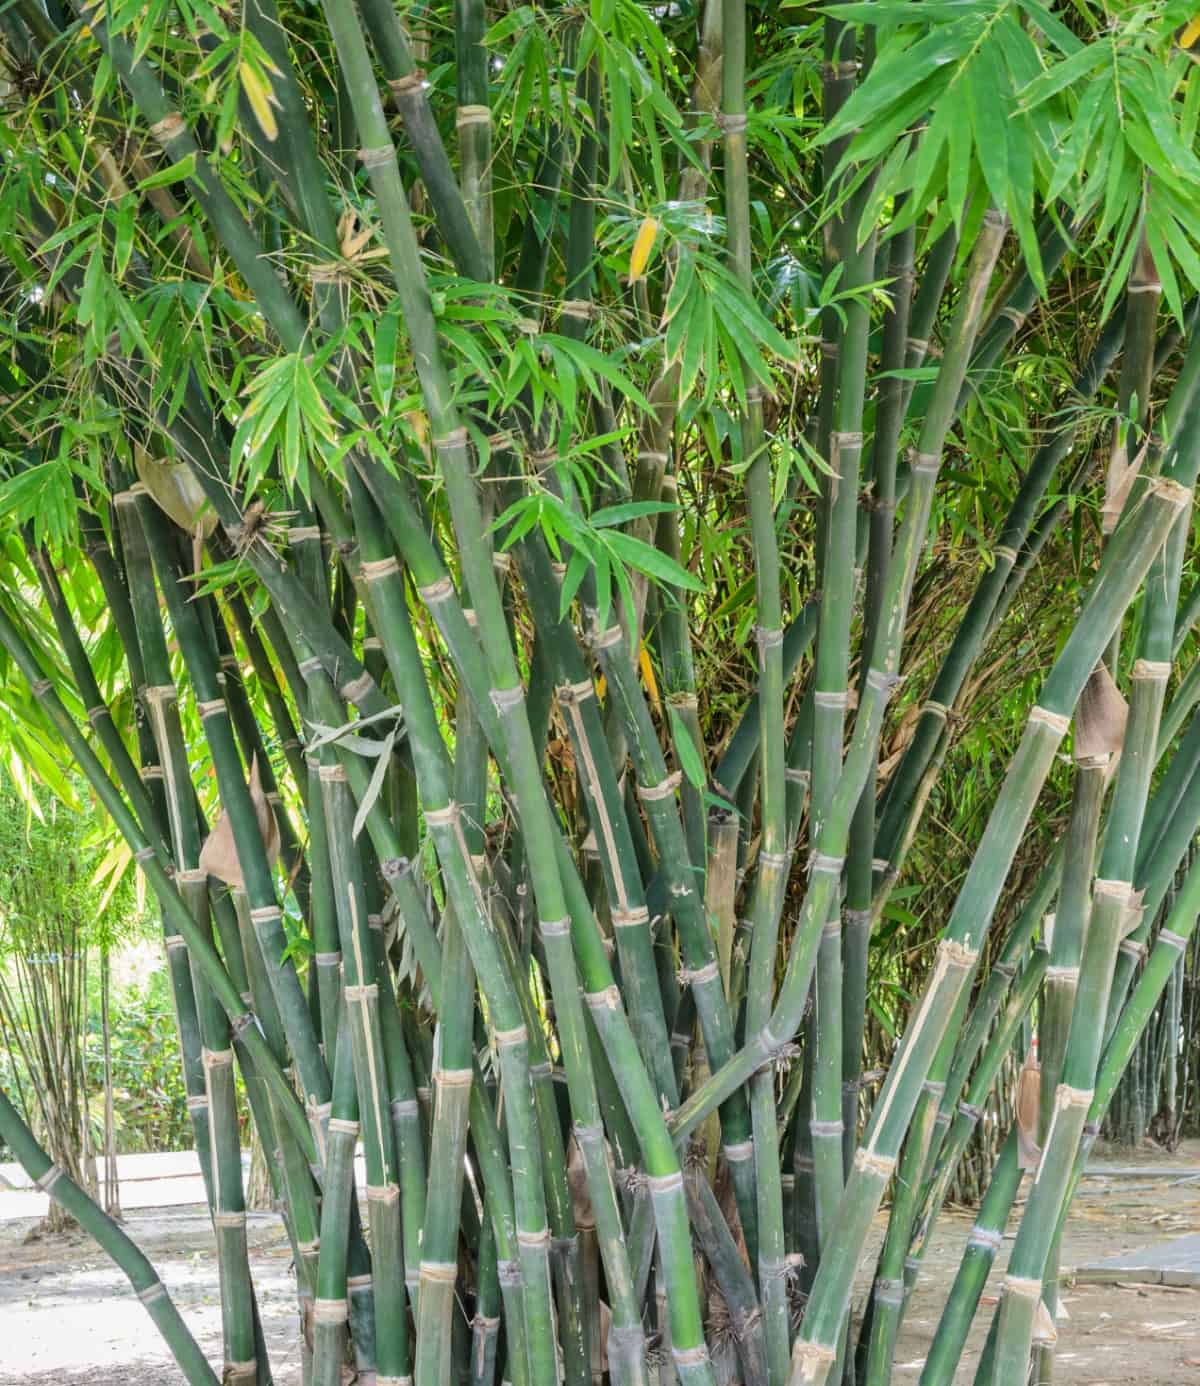 Clumps of South Kalimantan bamboo form a mushroom-shaped shrubby hedge.